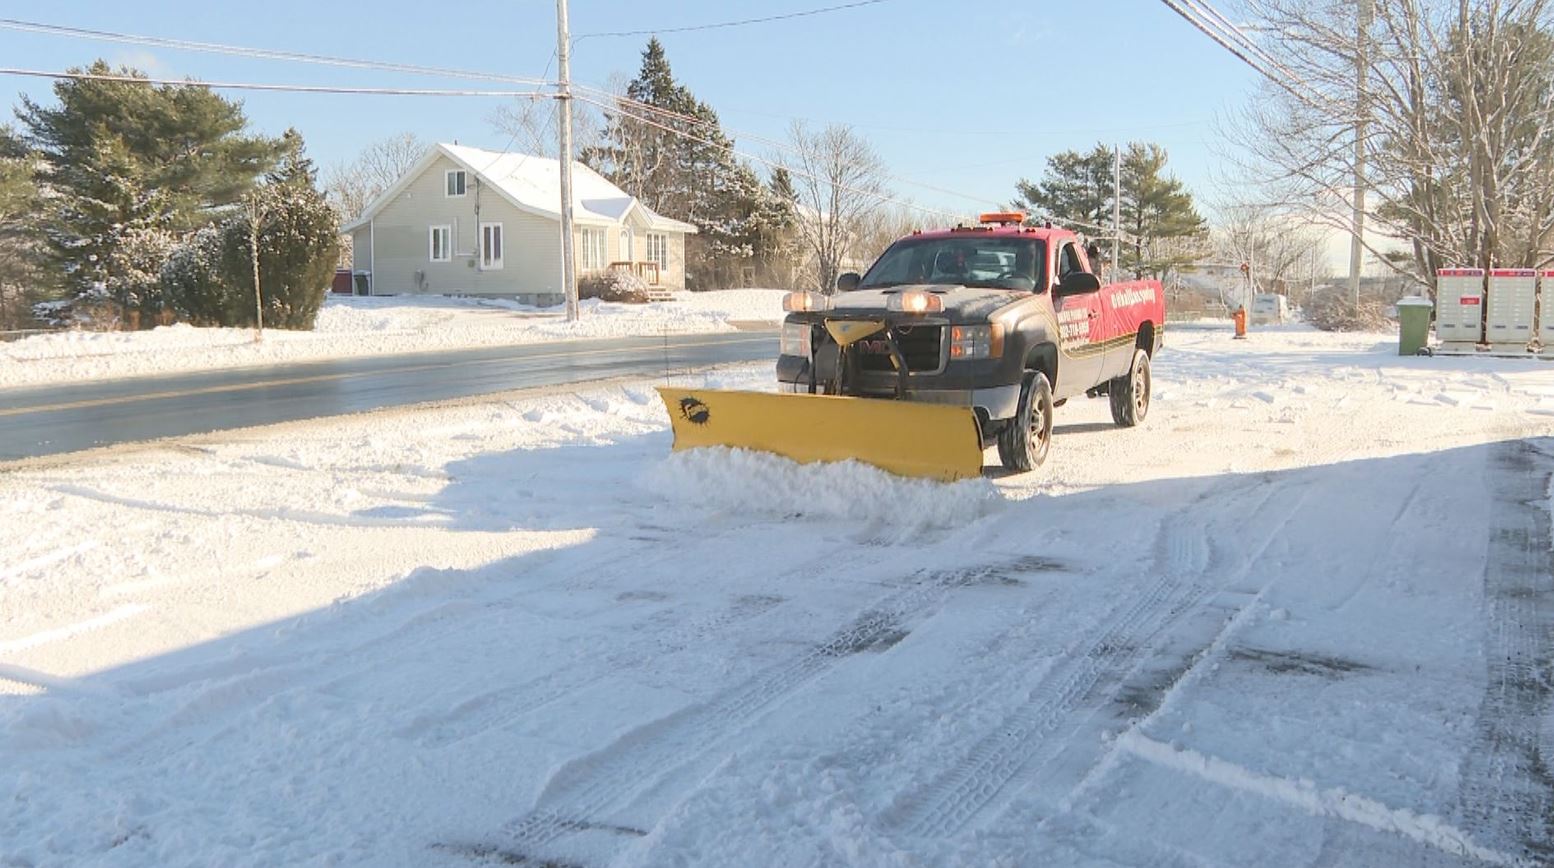 Concerns raised about snow removal response times; HRM asks for patience